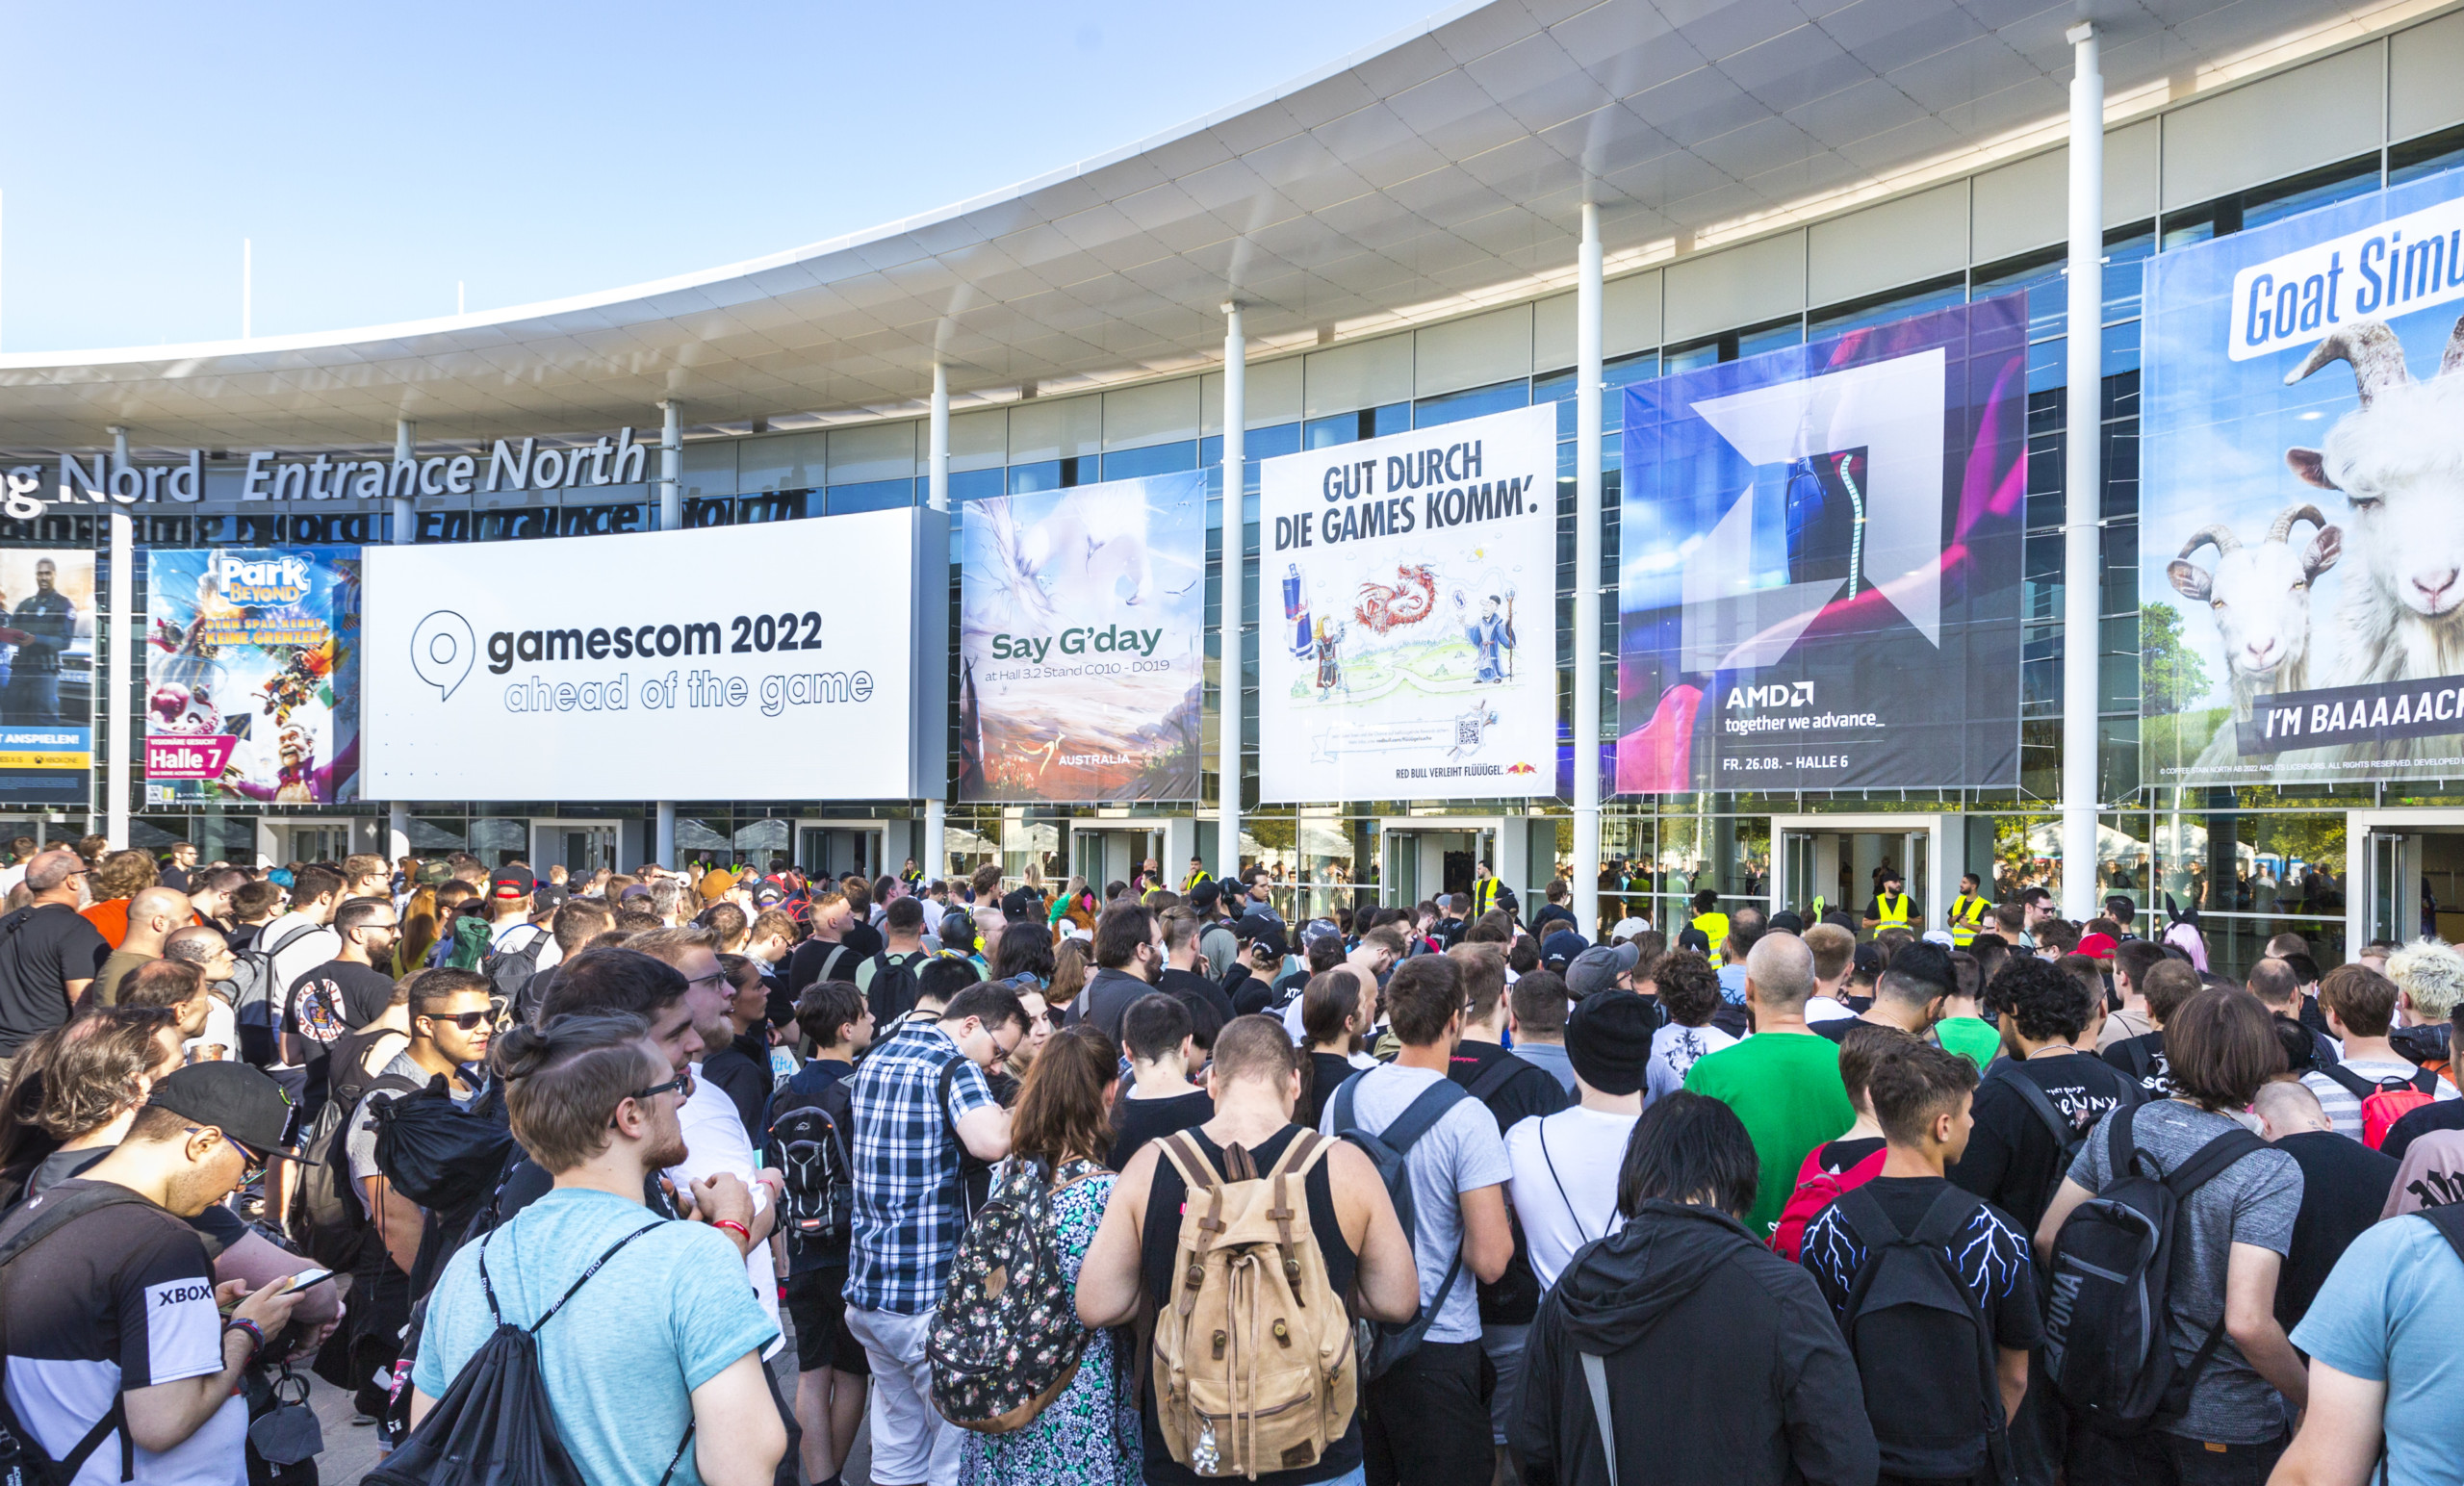 gamescom 2022: a strong comeback during challenging times